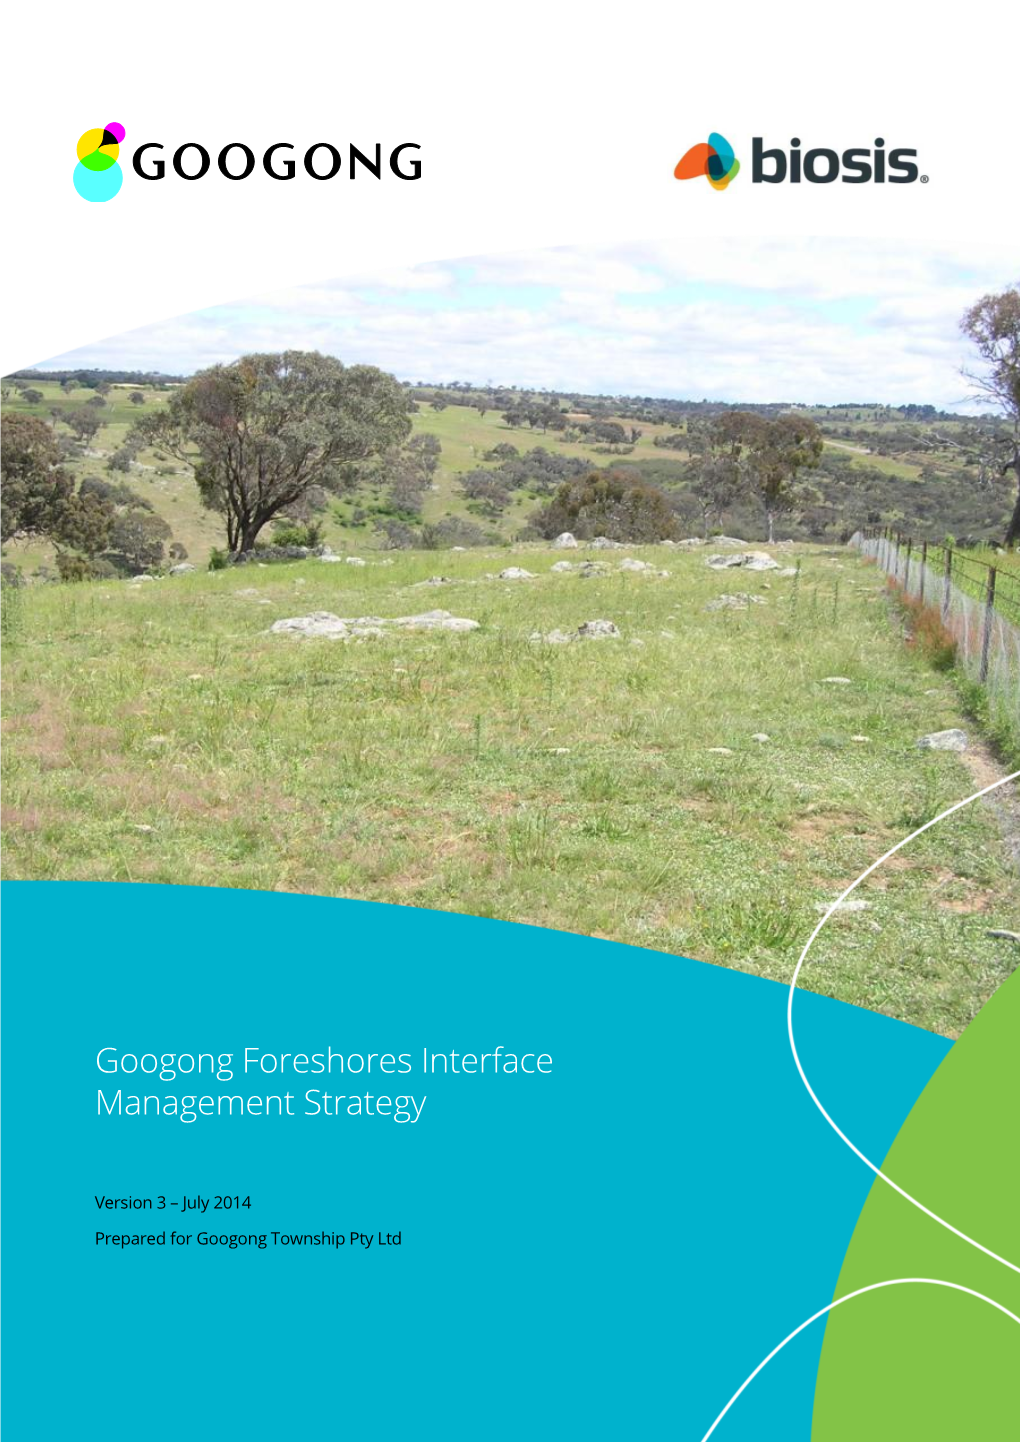 Googong Foreshores Interface Management Strategy